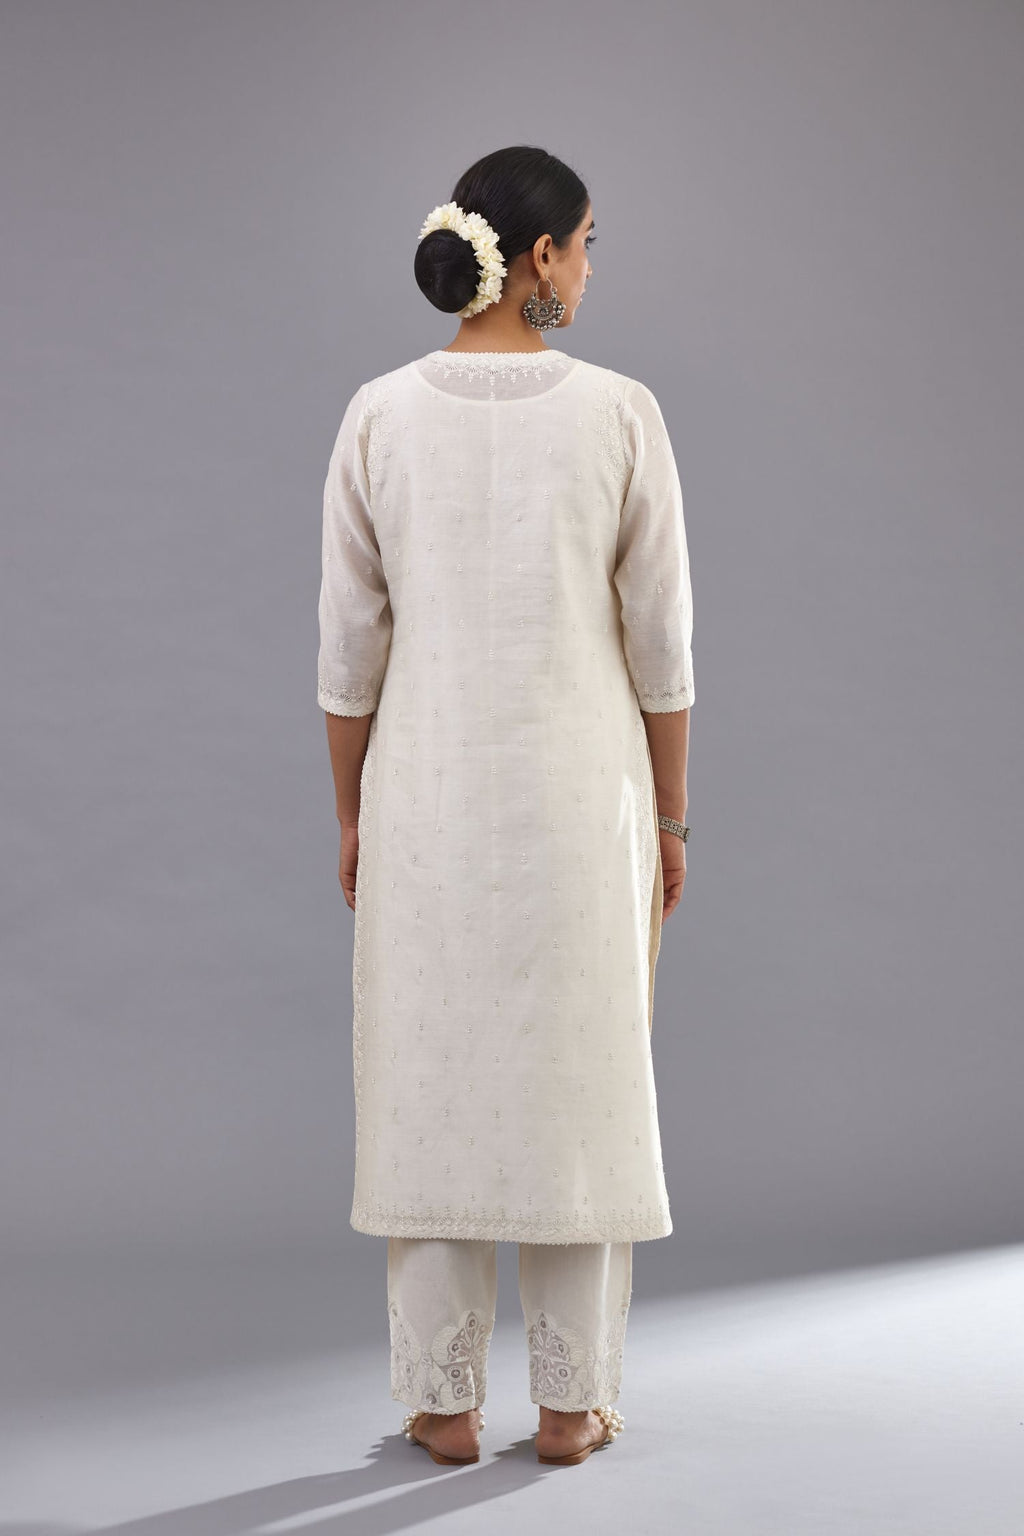 Off white silk chanderi straight kurta with dori and silk thread embroidery at the neck, armholes, hem and sleeve cuffs.